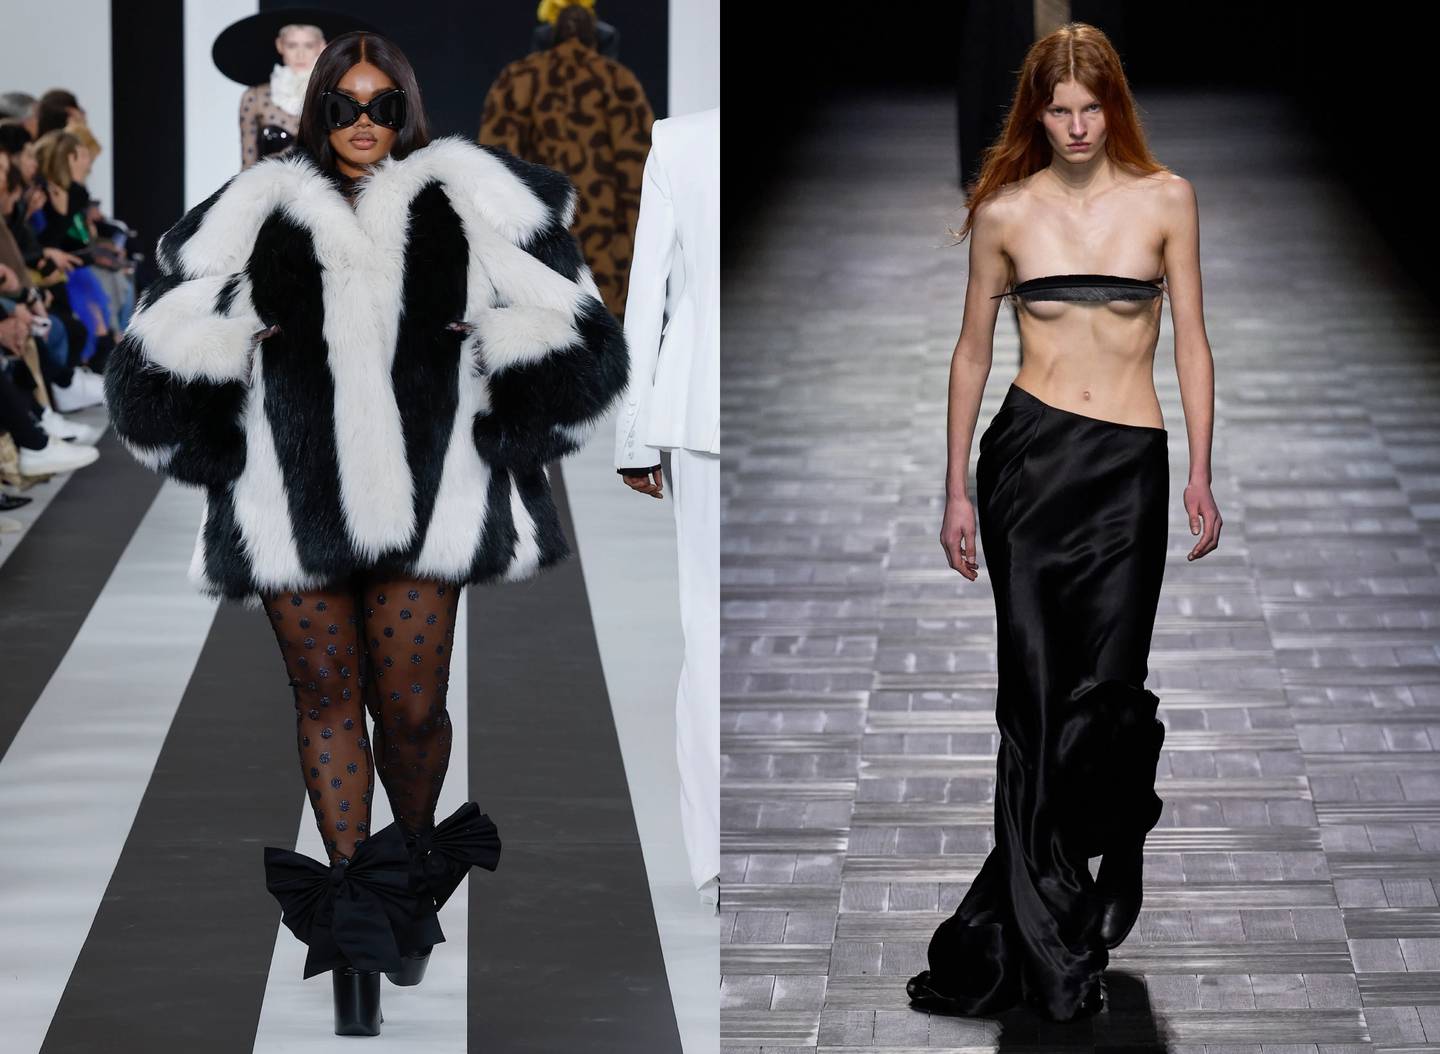 Nina Ricci and Ann Demeulemeester hosted debut shows for their designers during Paris Fashion Week.